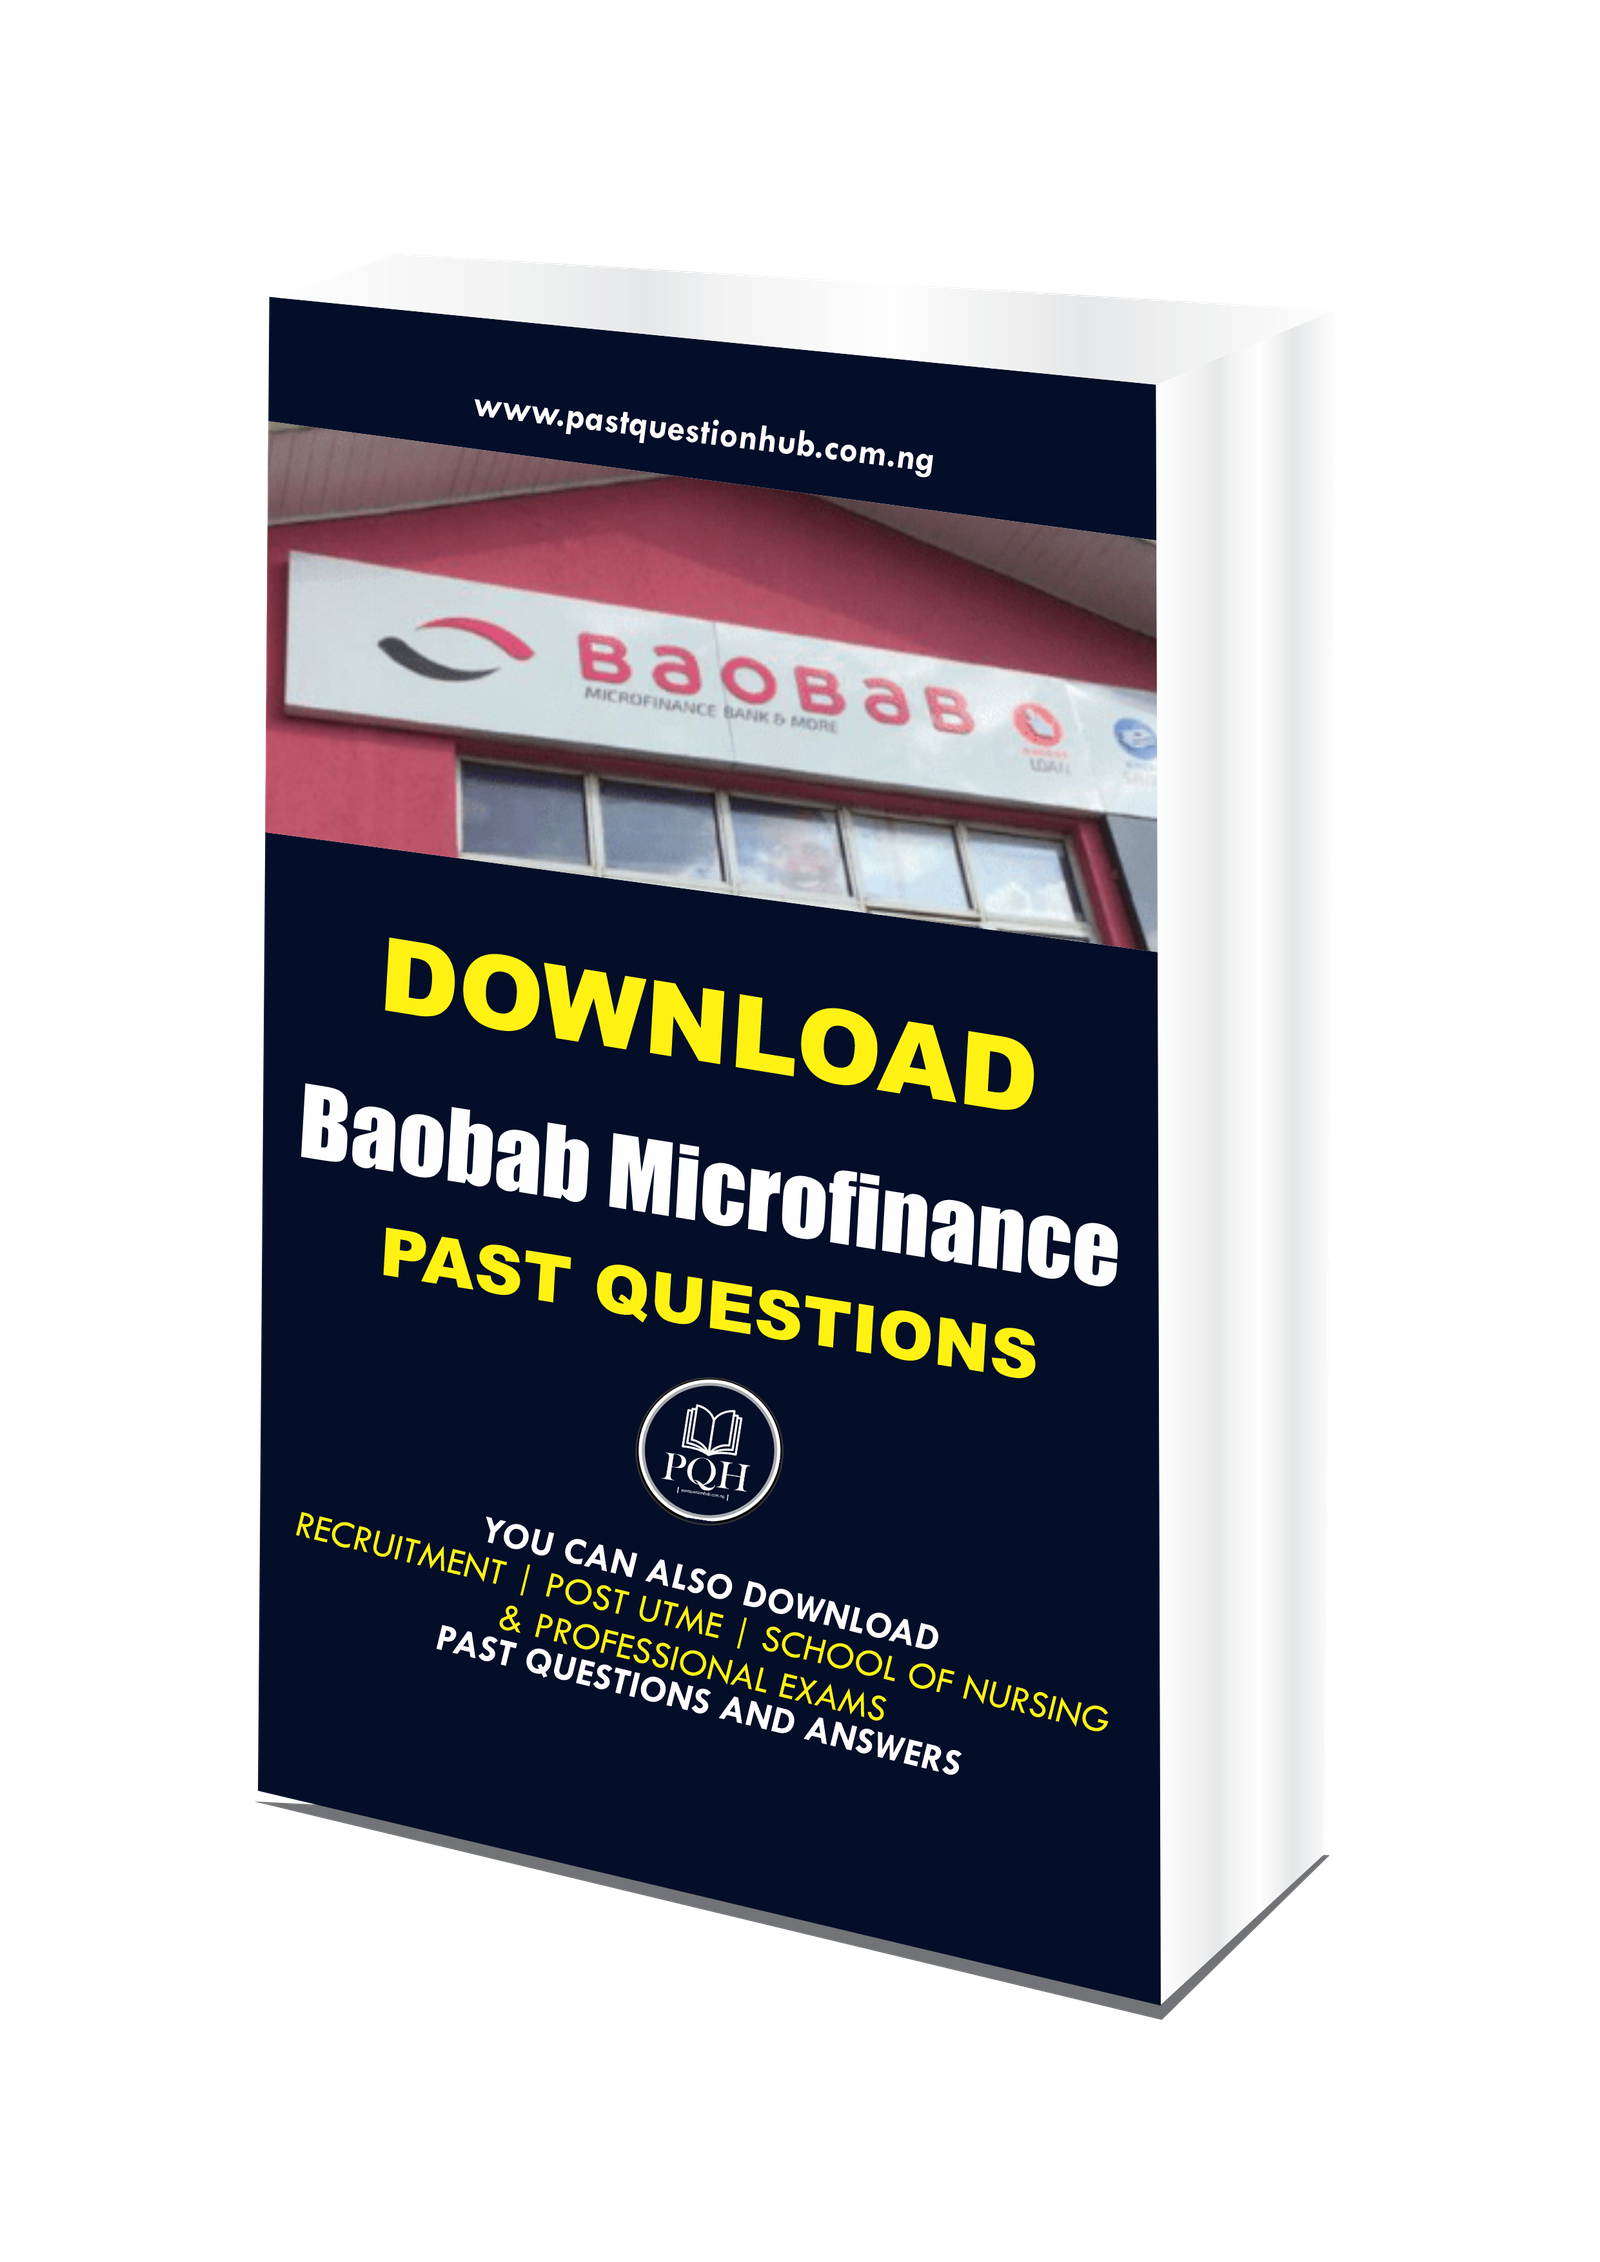 Baobab Microfinance Past Questions and Answers PDF